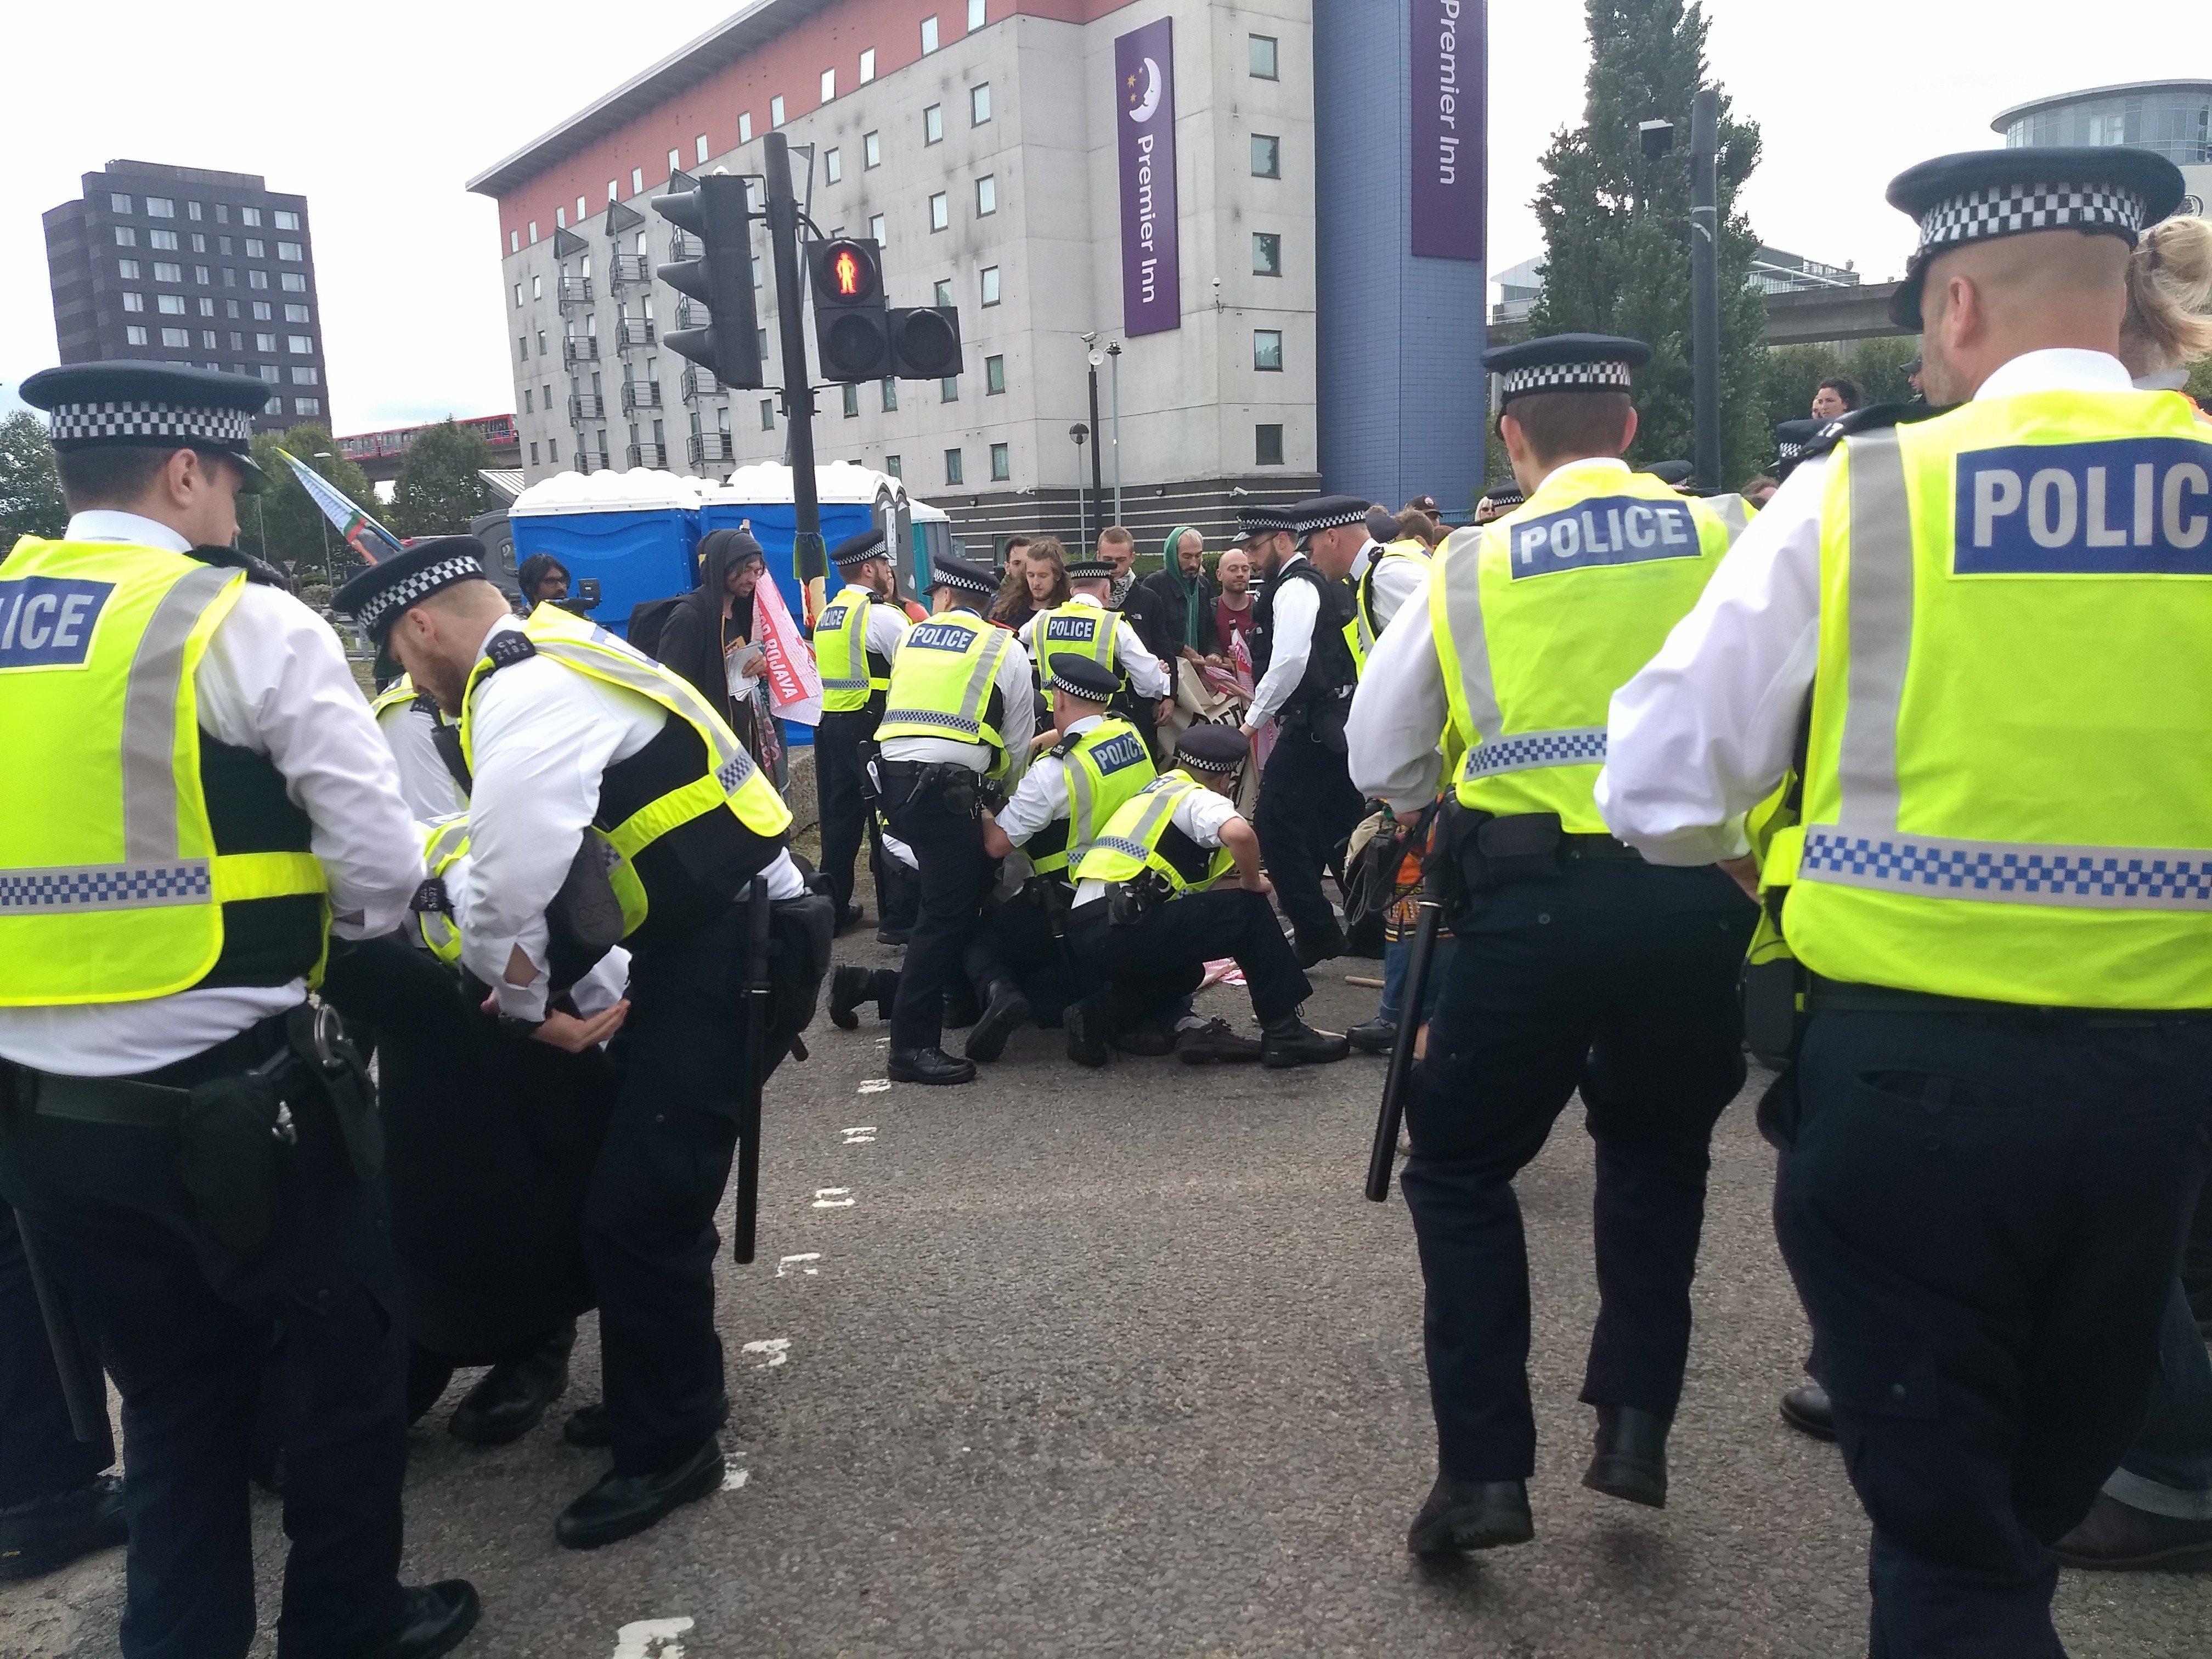 Police arrest activist in road outside DSEI arms fair